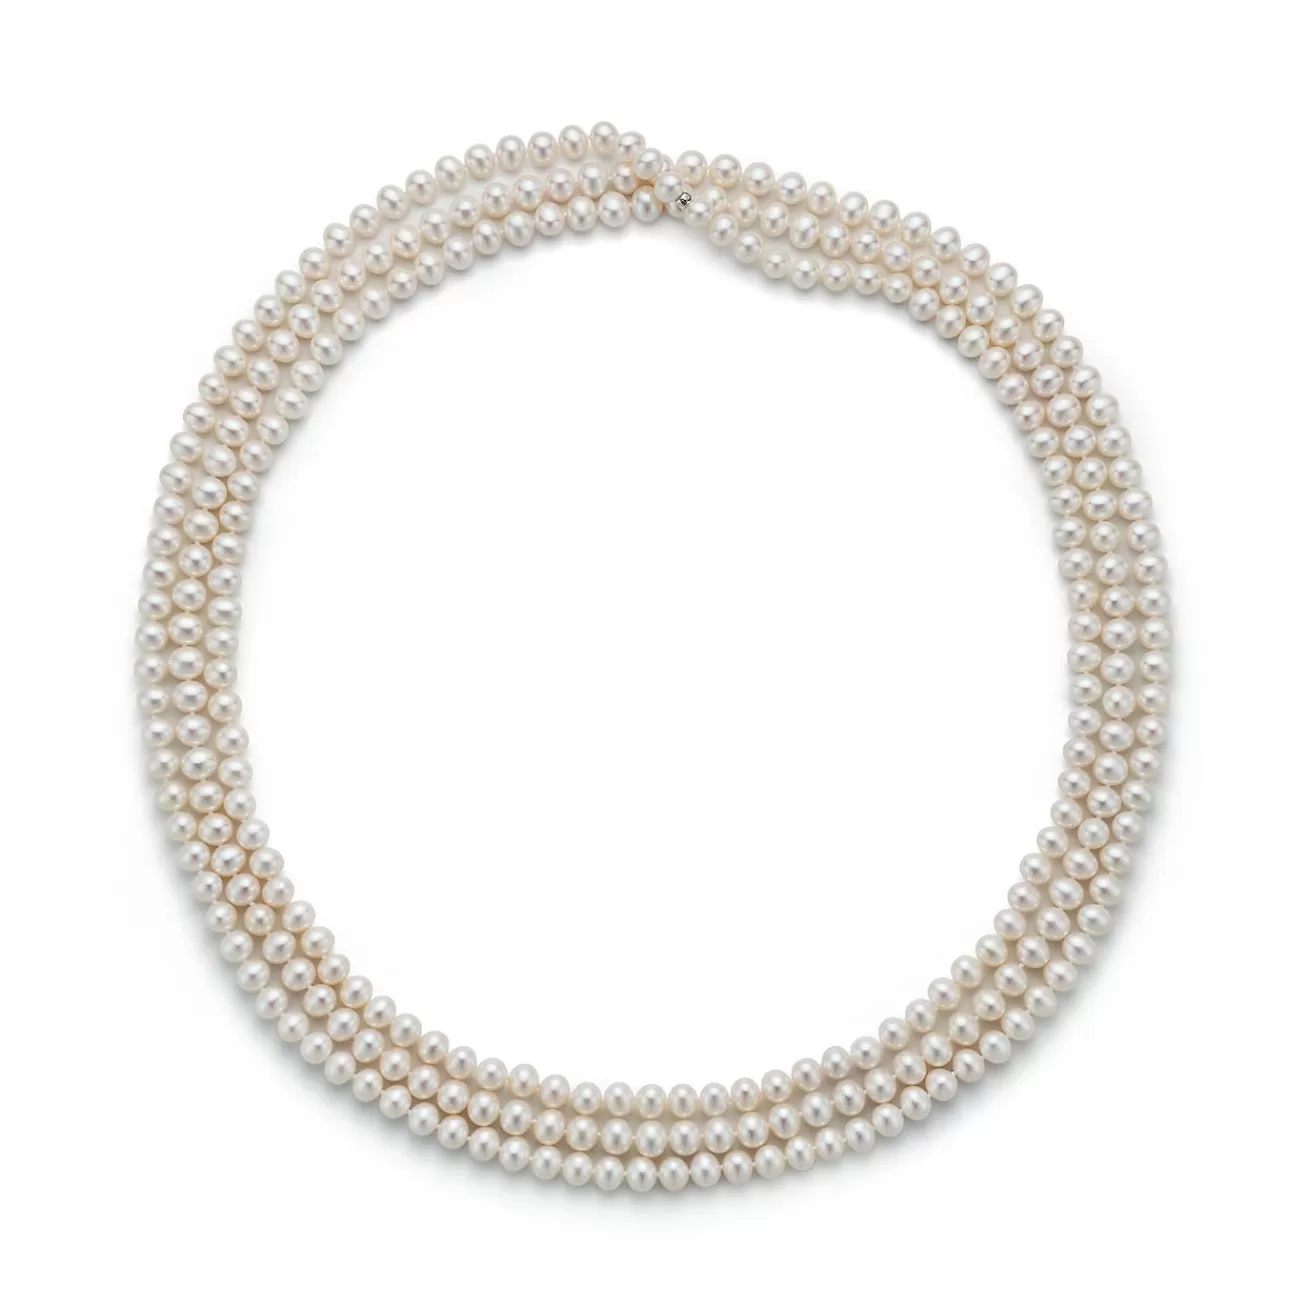 Tiffany & Co. Ziegfeld Collection Pearl Wrap Necklace with Silver Clasp, 6-7 mm | ^ Necklaces & Pendants | Sterling Silver Jewelry